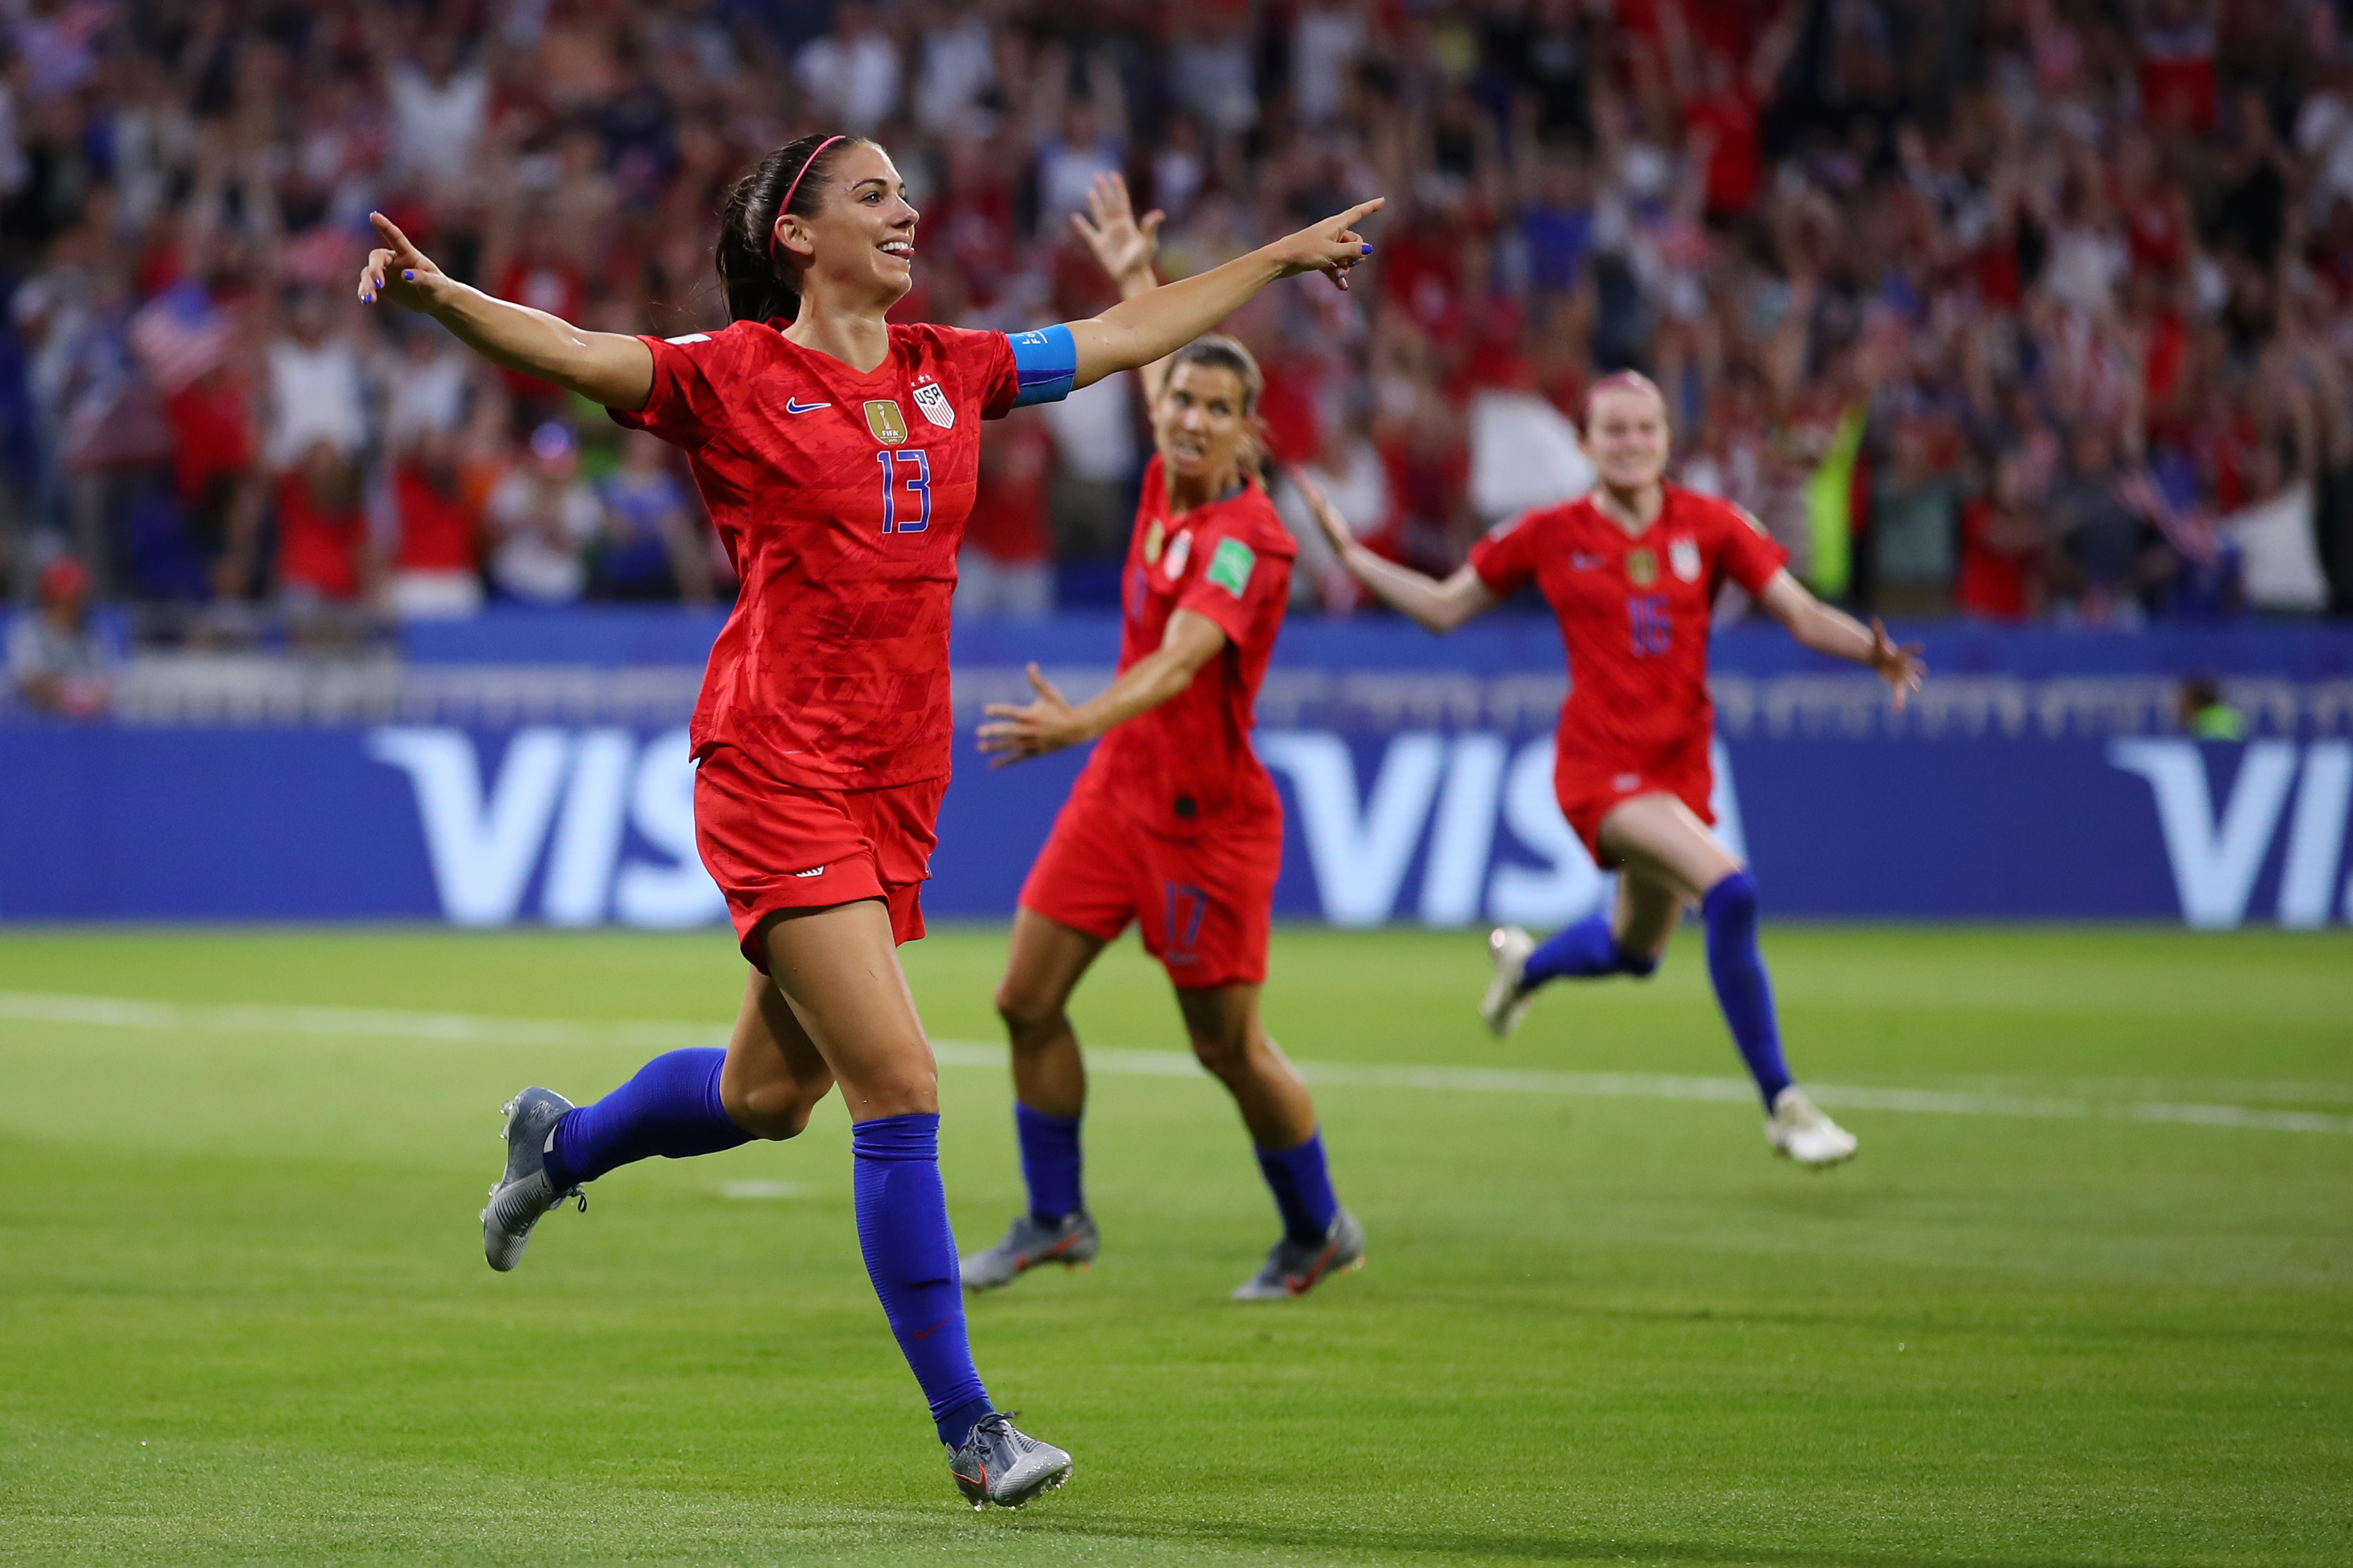 Alex Morgan of the USA celebrates after scoring her team's second goal during the 2019 FIFA Women's World Cup France Semi Final match between England and USA at Stade de Lyon on July 02, 2019 in Lyon, France. (Photo by Richard Heathcote/Getty Images)